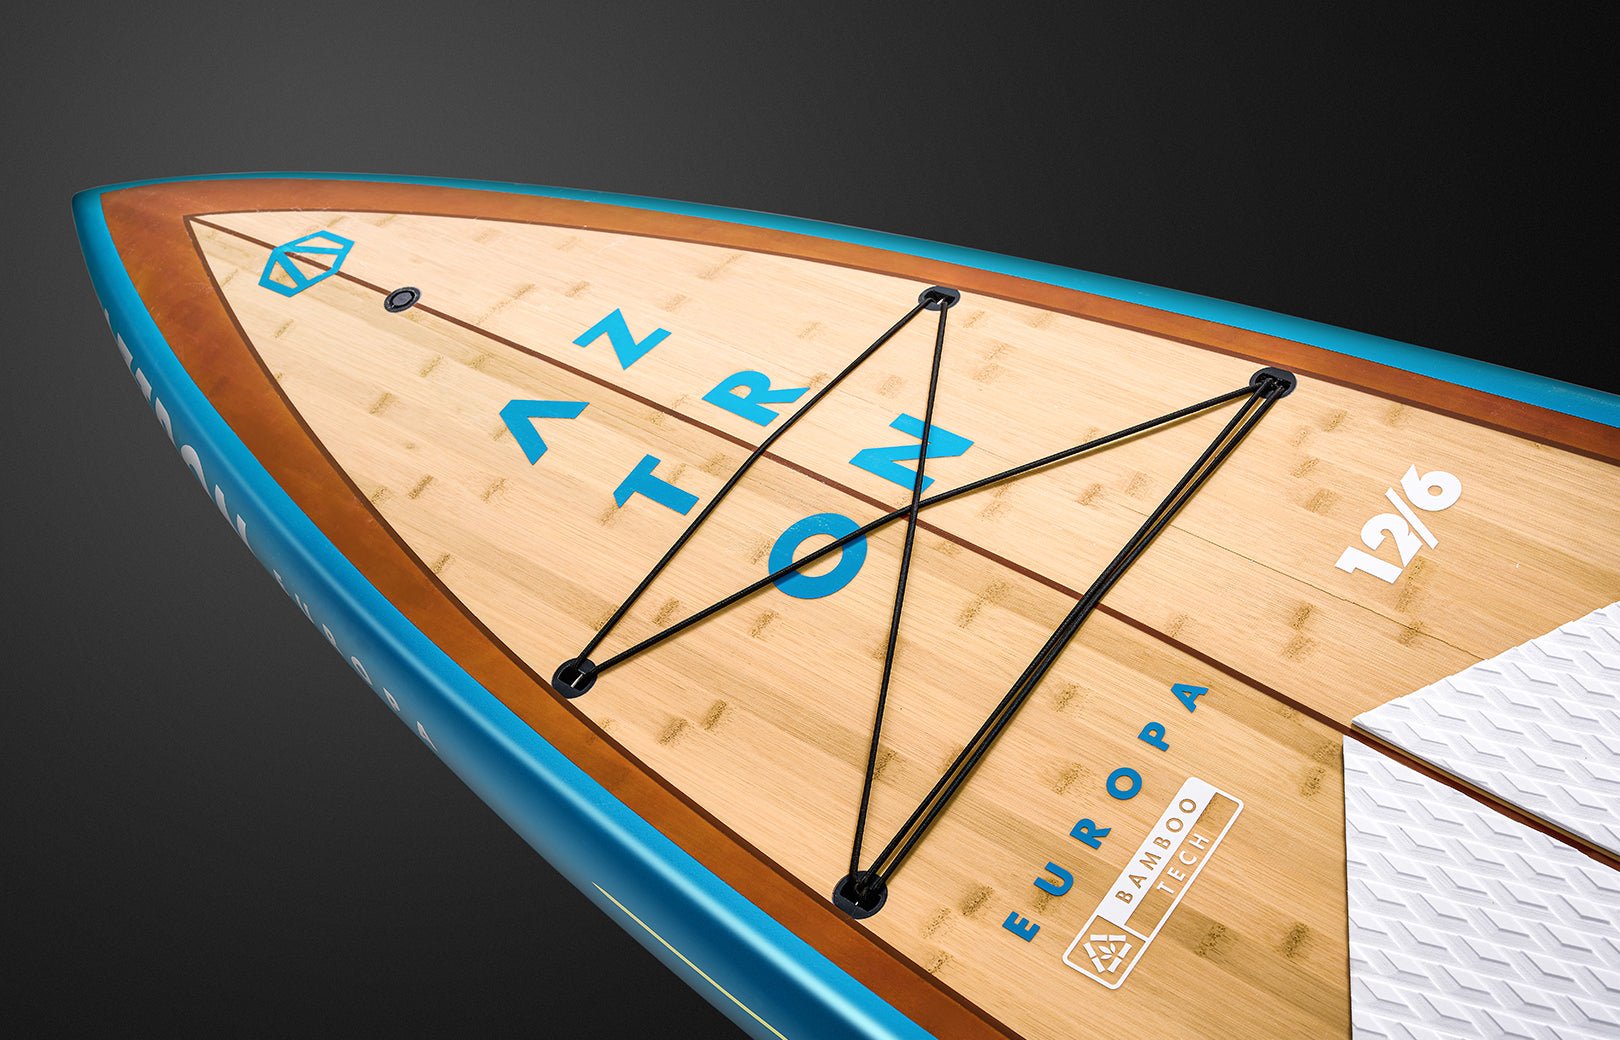 Aztron EUROPA Bamboo Touring 12'6" - Worthing Watersports - AH-630 - SUP Composite - Aztron